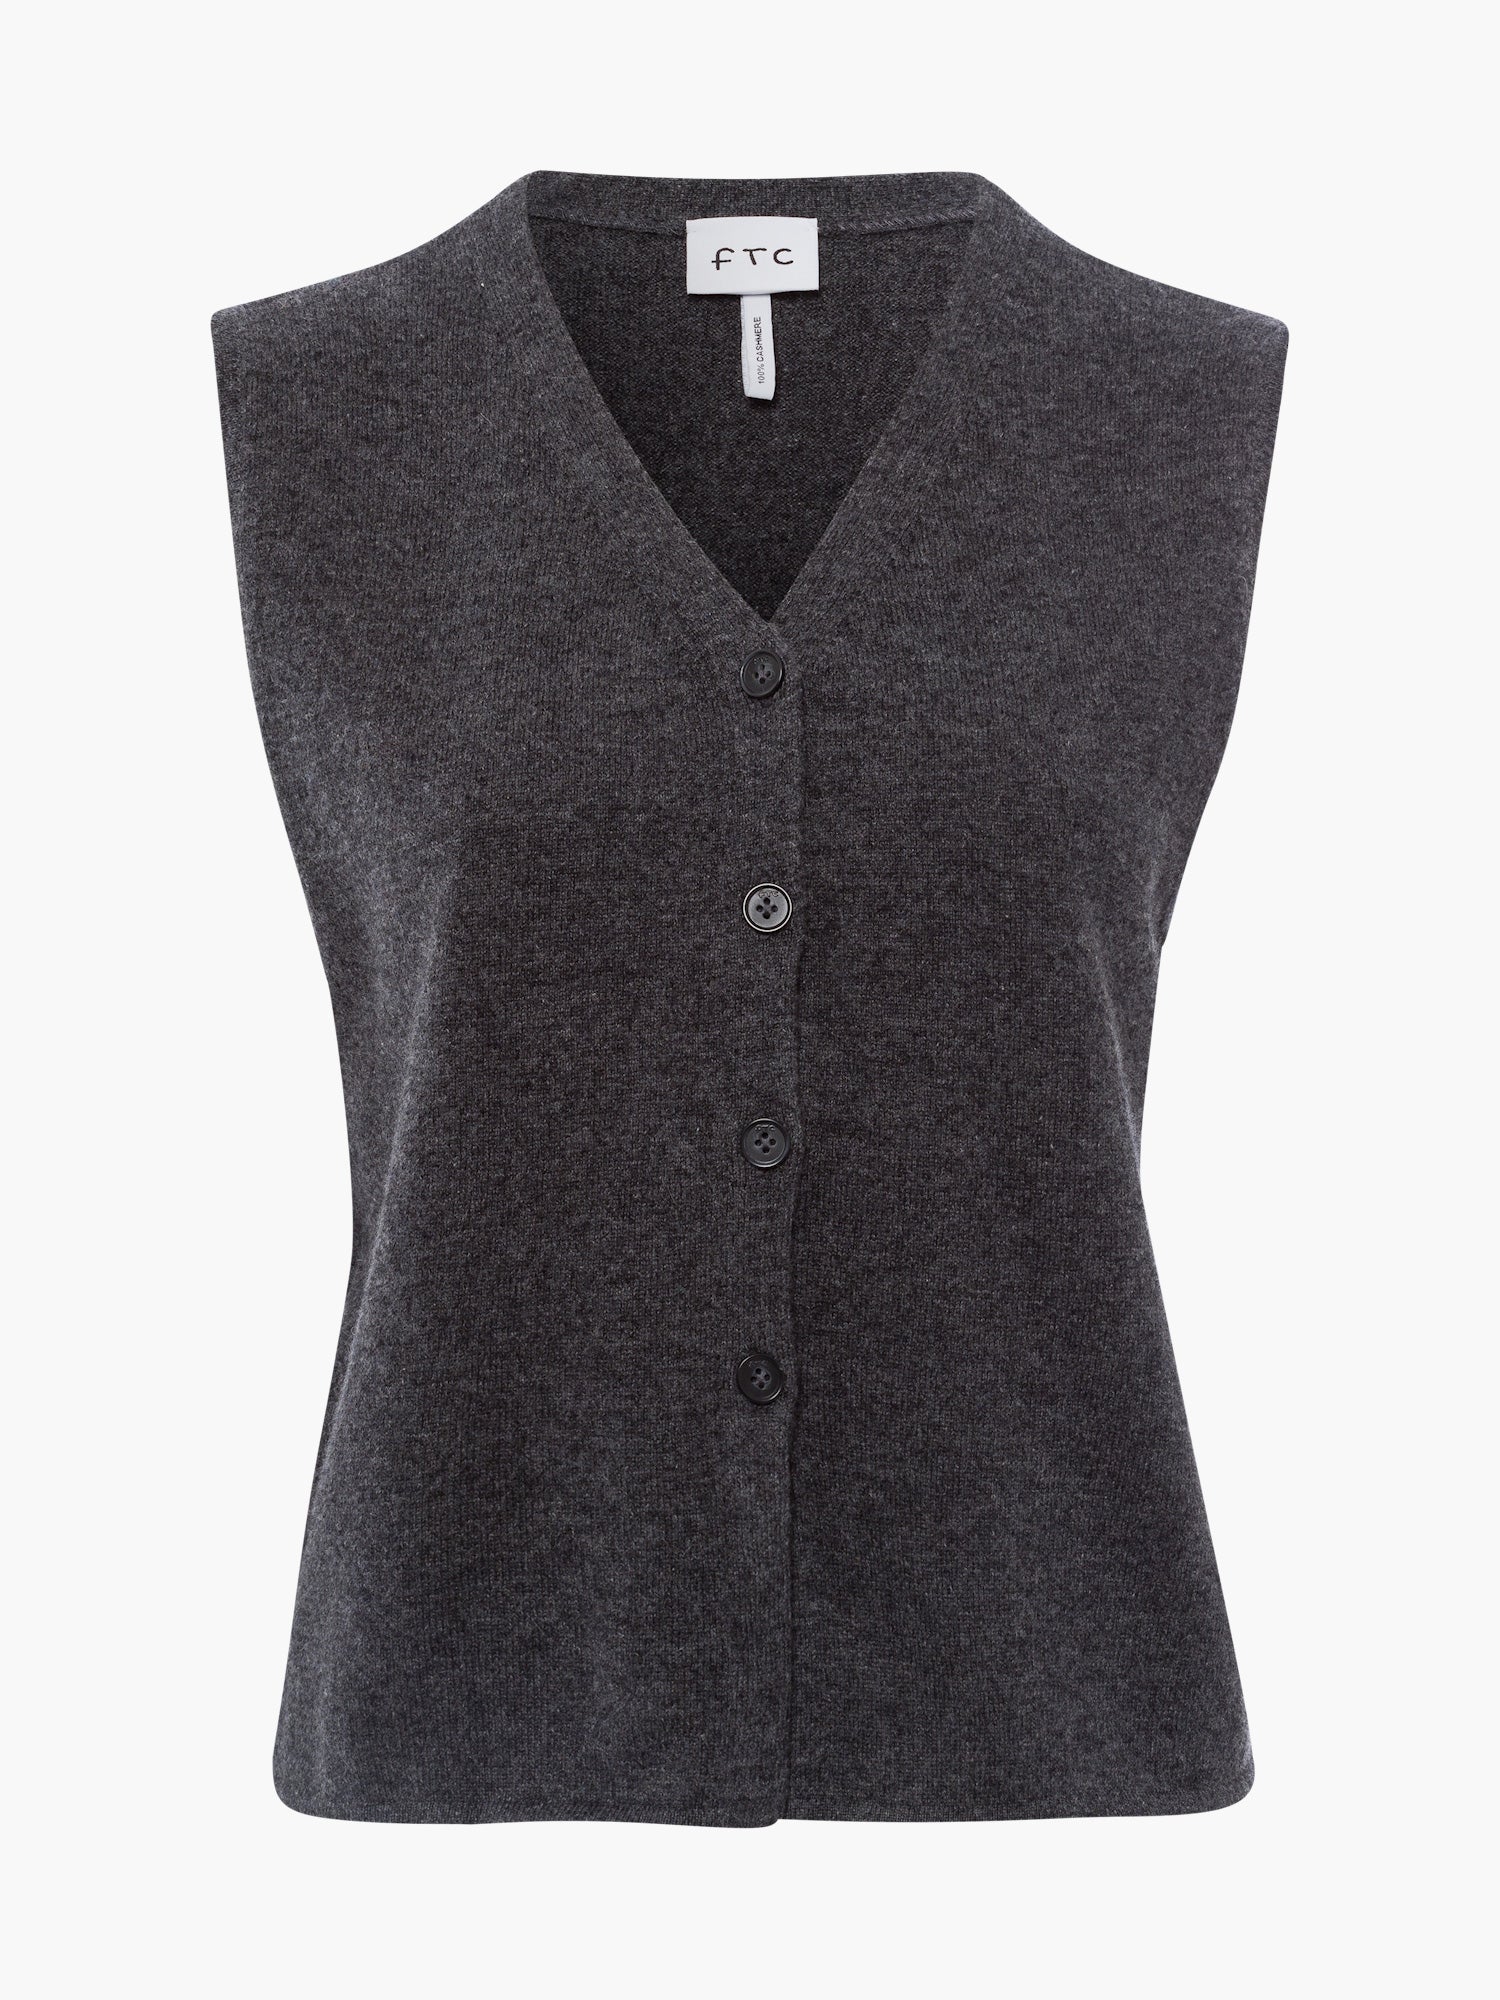 FTC-Cashmere-OUTLET-SALE-Cardigan-no-Sleeve-Strick-ARCHIVE-COLLECTION.jpg